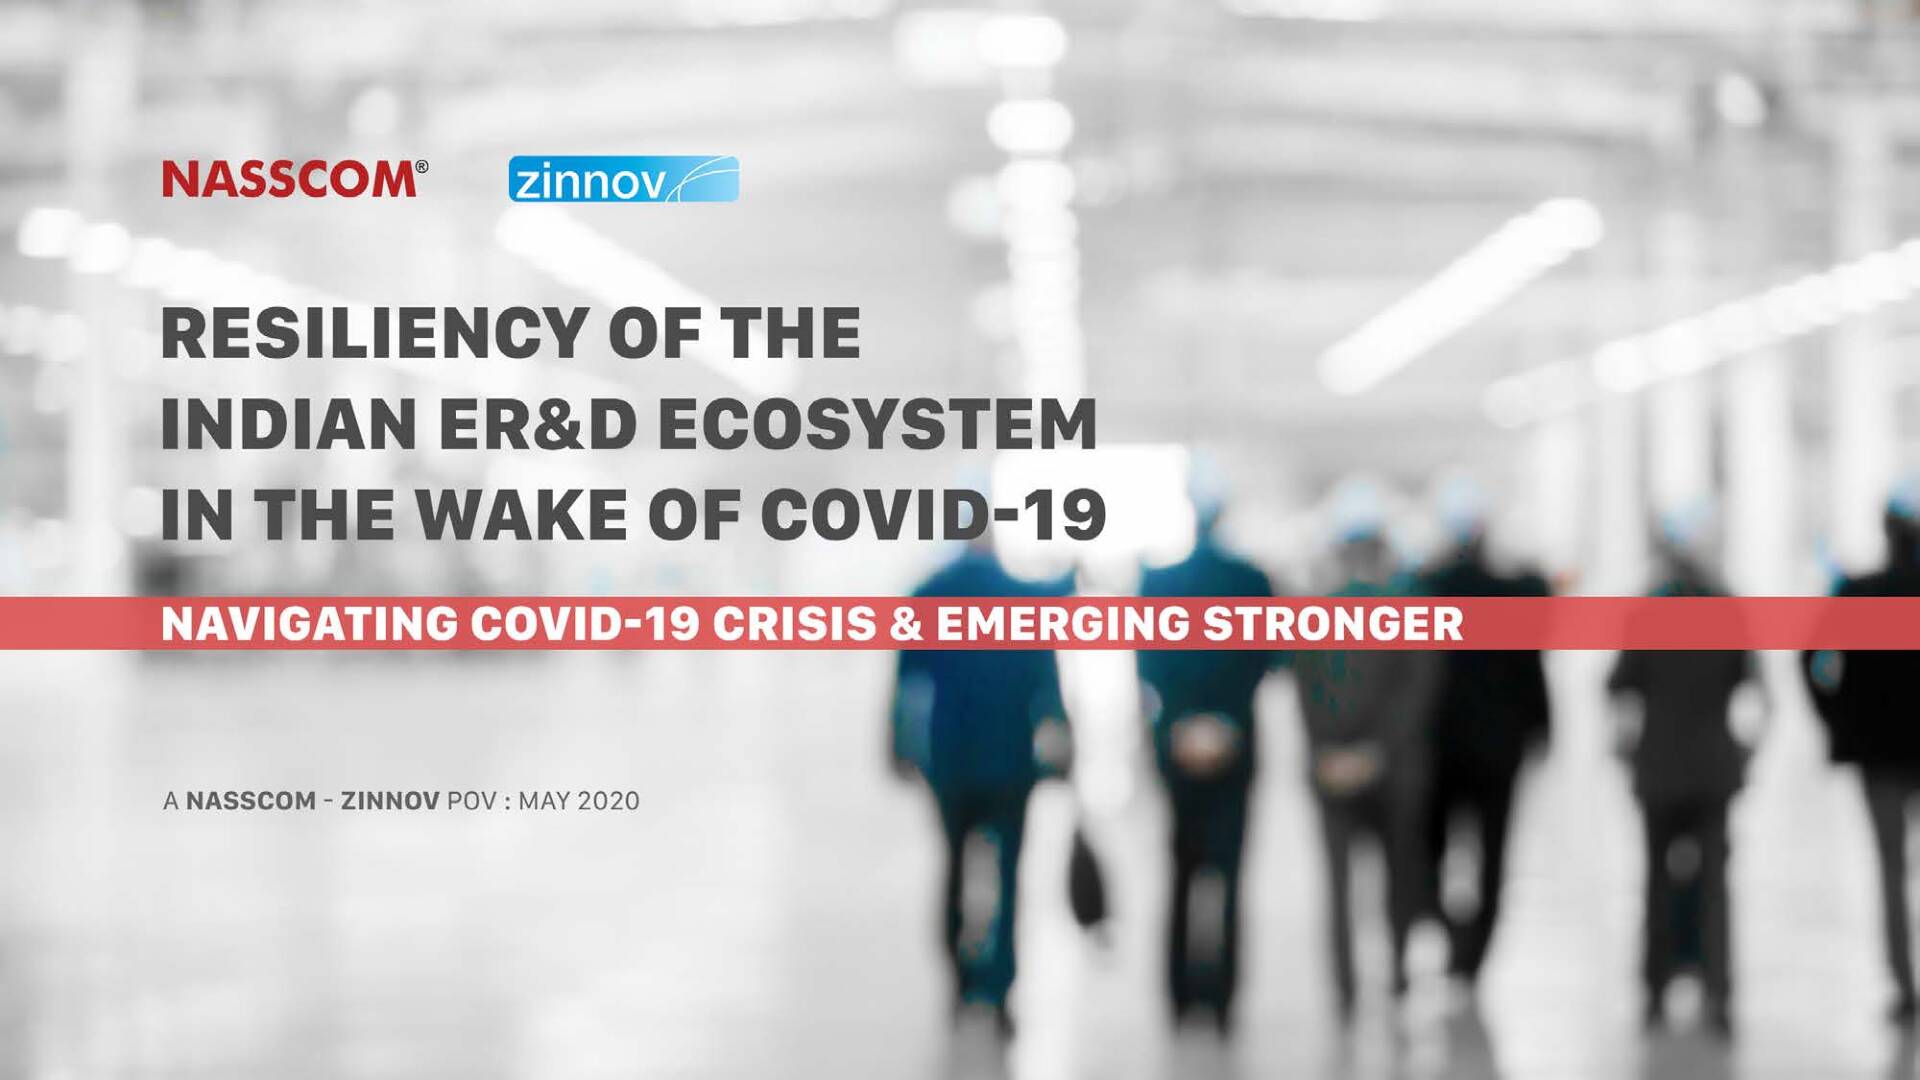 Resiliency Of The Indian Erd Ecosystem In The Wake Of Covid 19 8jun201